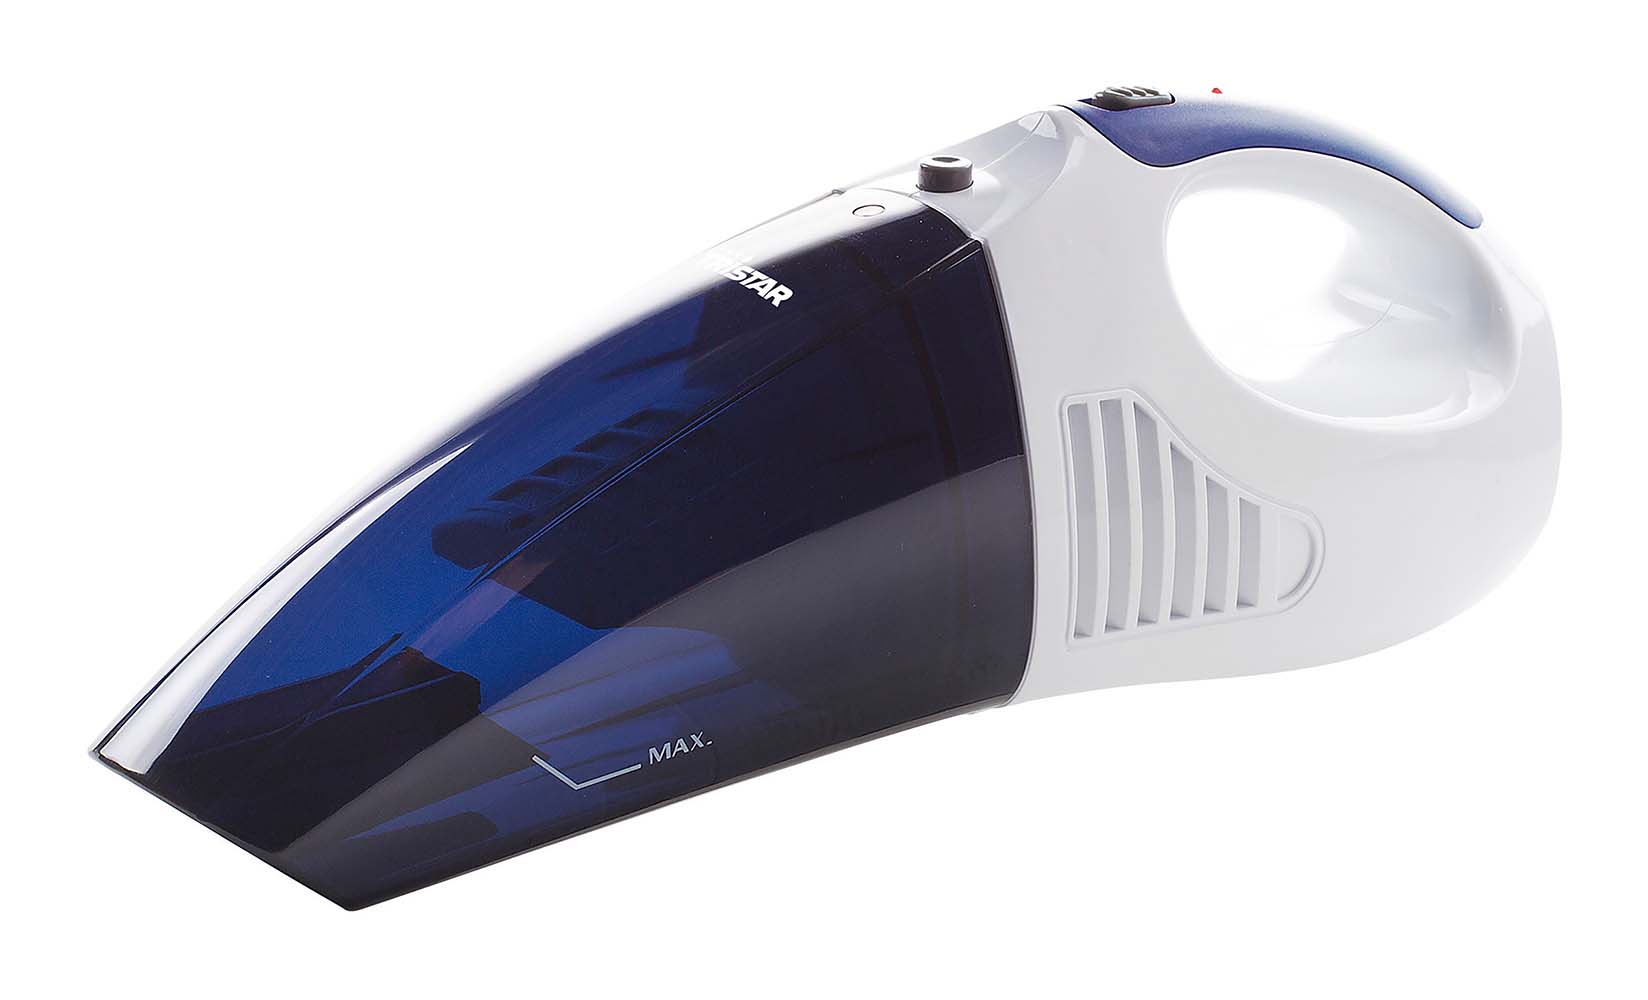 8500547 Compact and rechargeable hand-held vacuum. Suitable for wet and dry vacuuming and fitted with an ergonomic handle. This hand-held vacuum has a brush attachment and a liquid attachment. Supplied with a wall holder that recharges the device. The washable filter and transparent dust collector are easy to clean. Contents: 550 ml, 230 Volts.